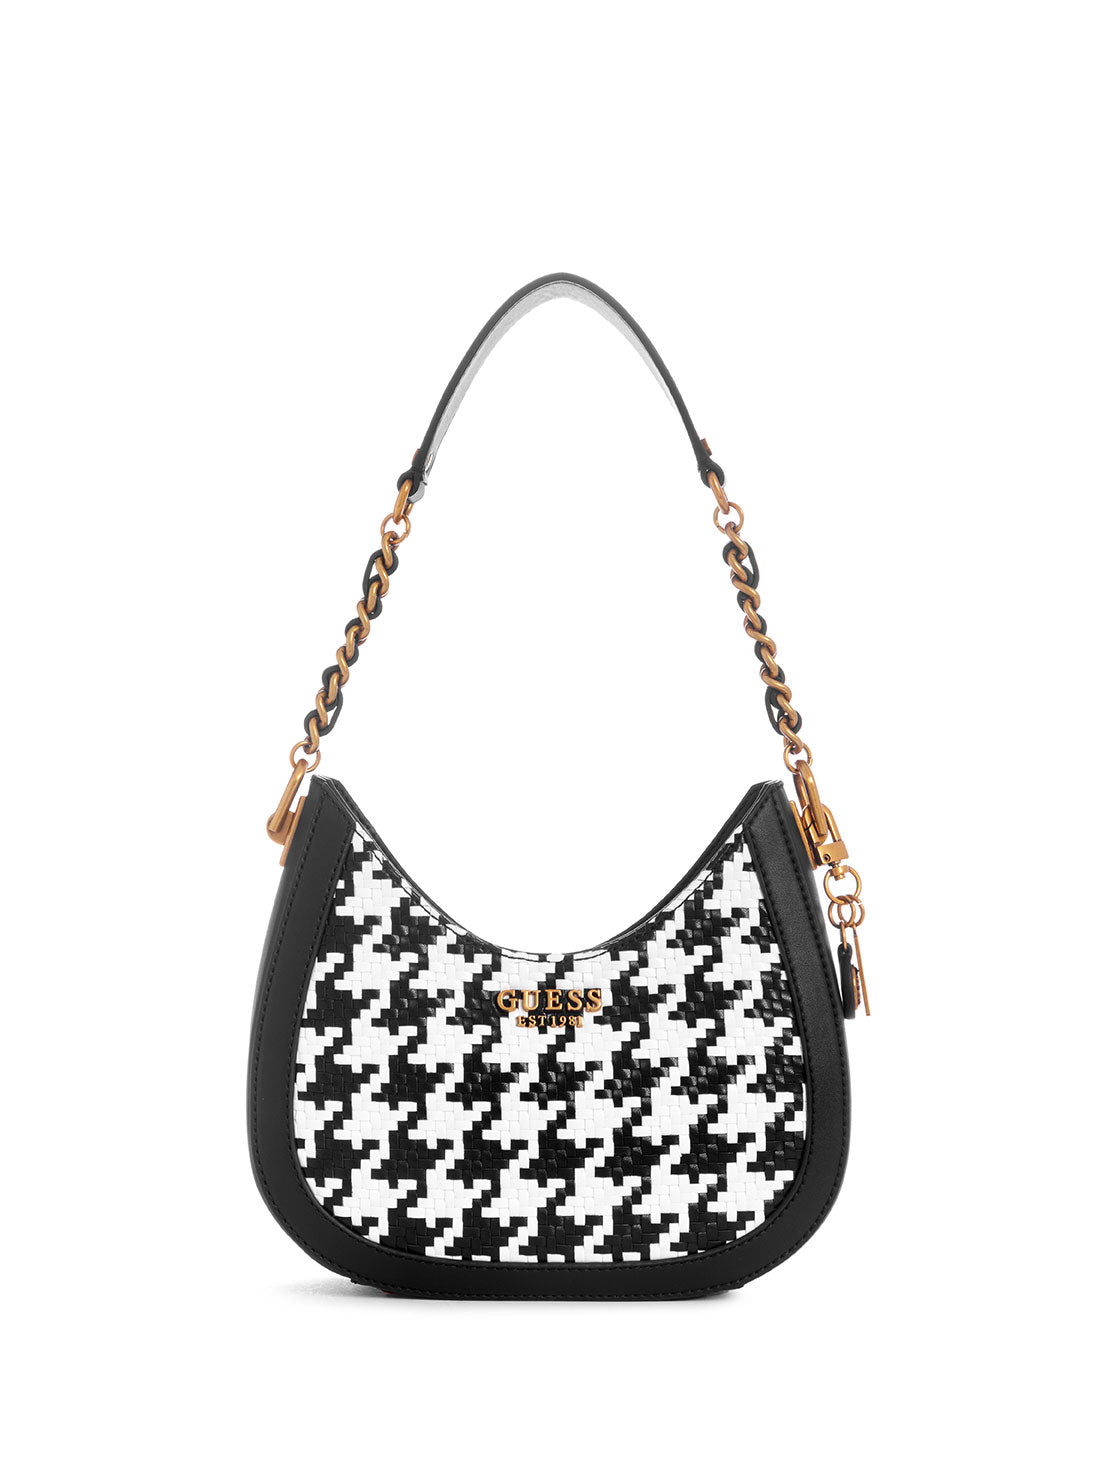 GUESS Women's Black White Abey Small Hobo Bag HT855801 Front View